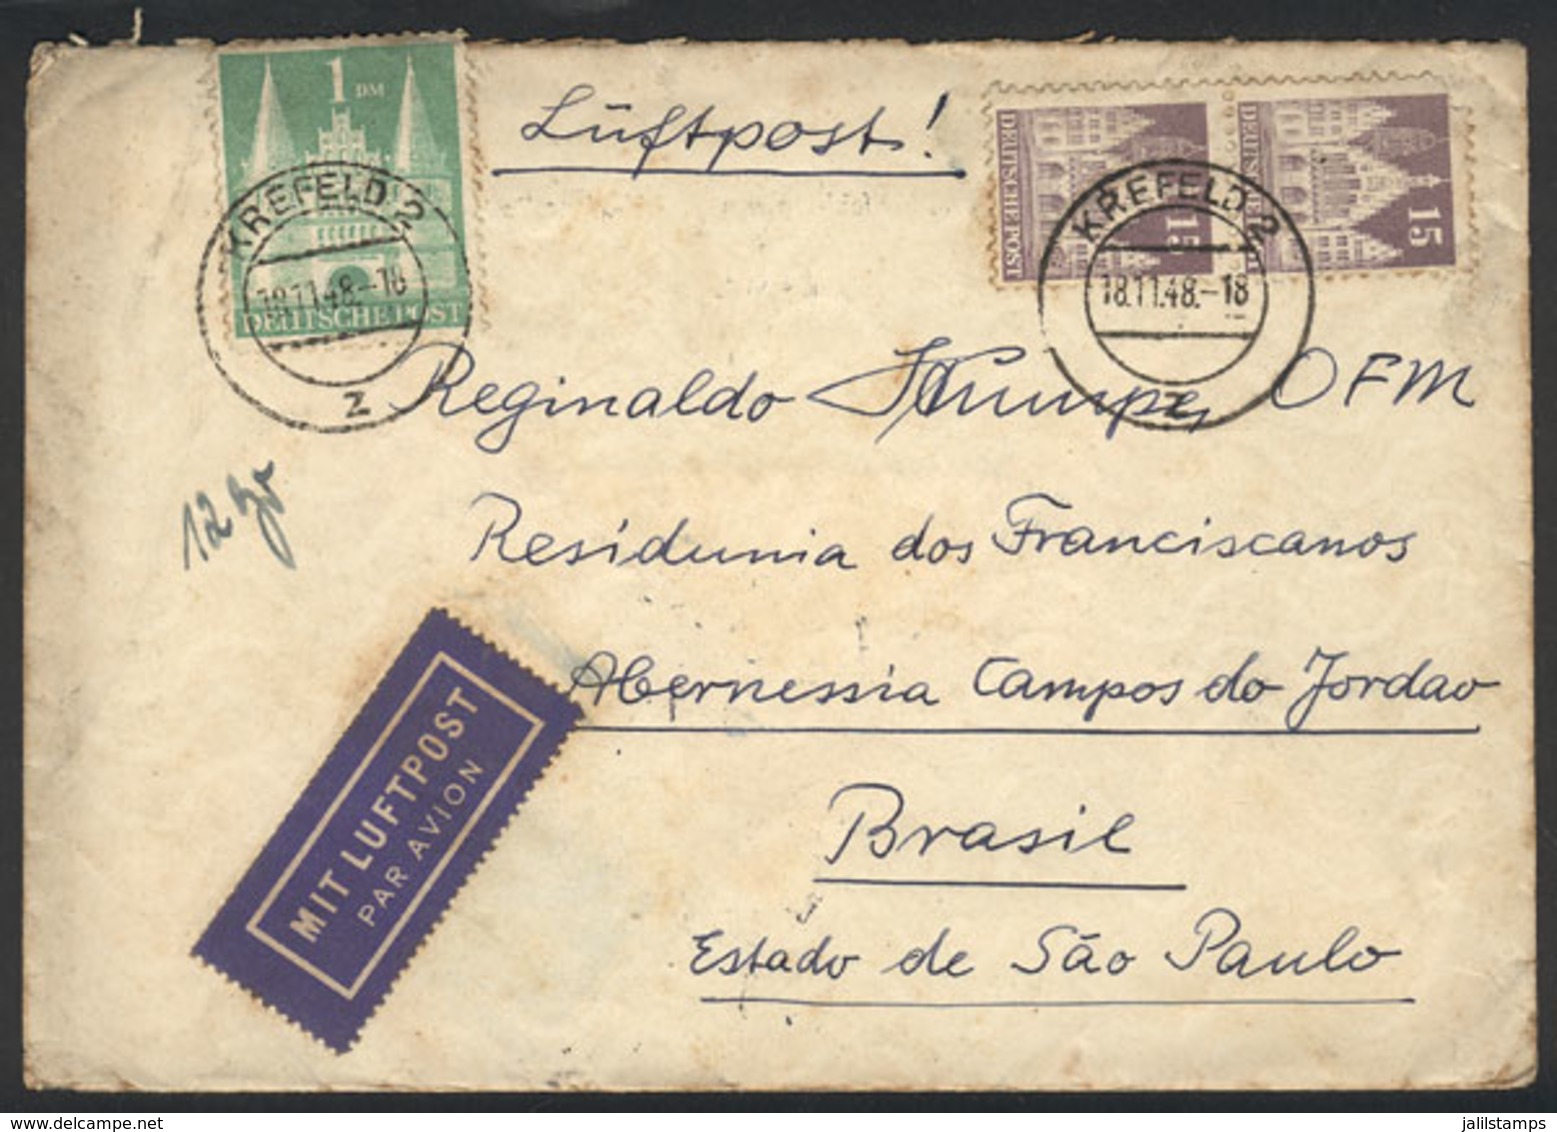 GERMANY: Airmail Cover Sent From Krefeld To Brazil On 18/NO/1948 Franked With 1.30Dm., Interesting! - Prephilately